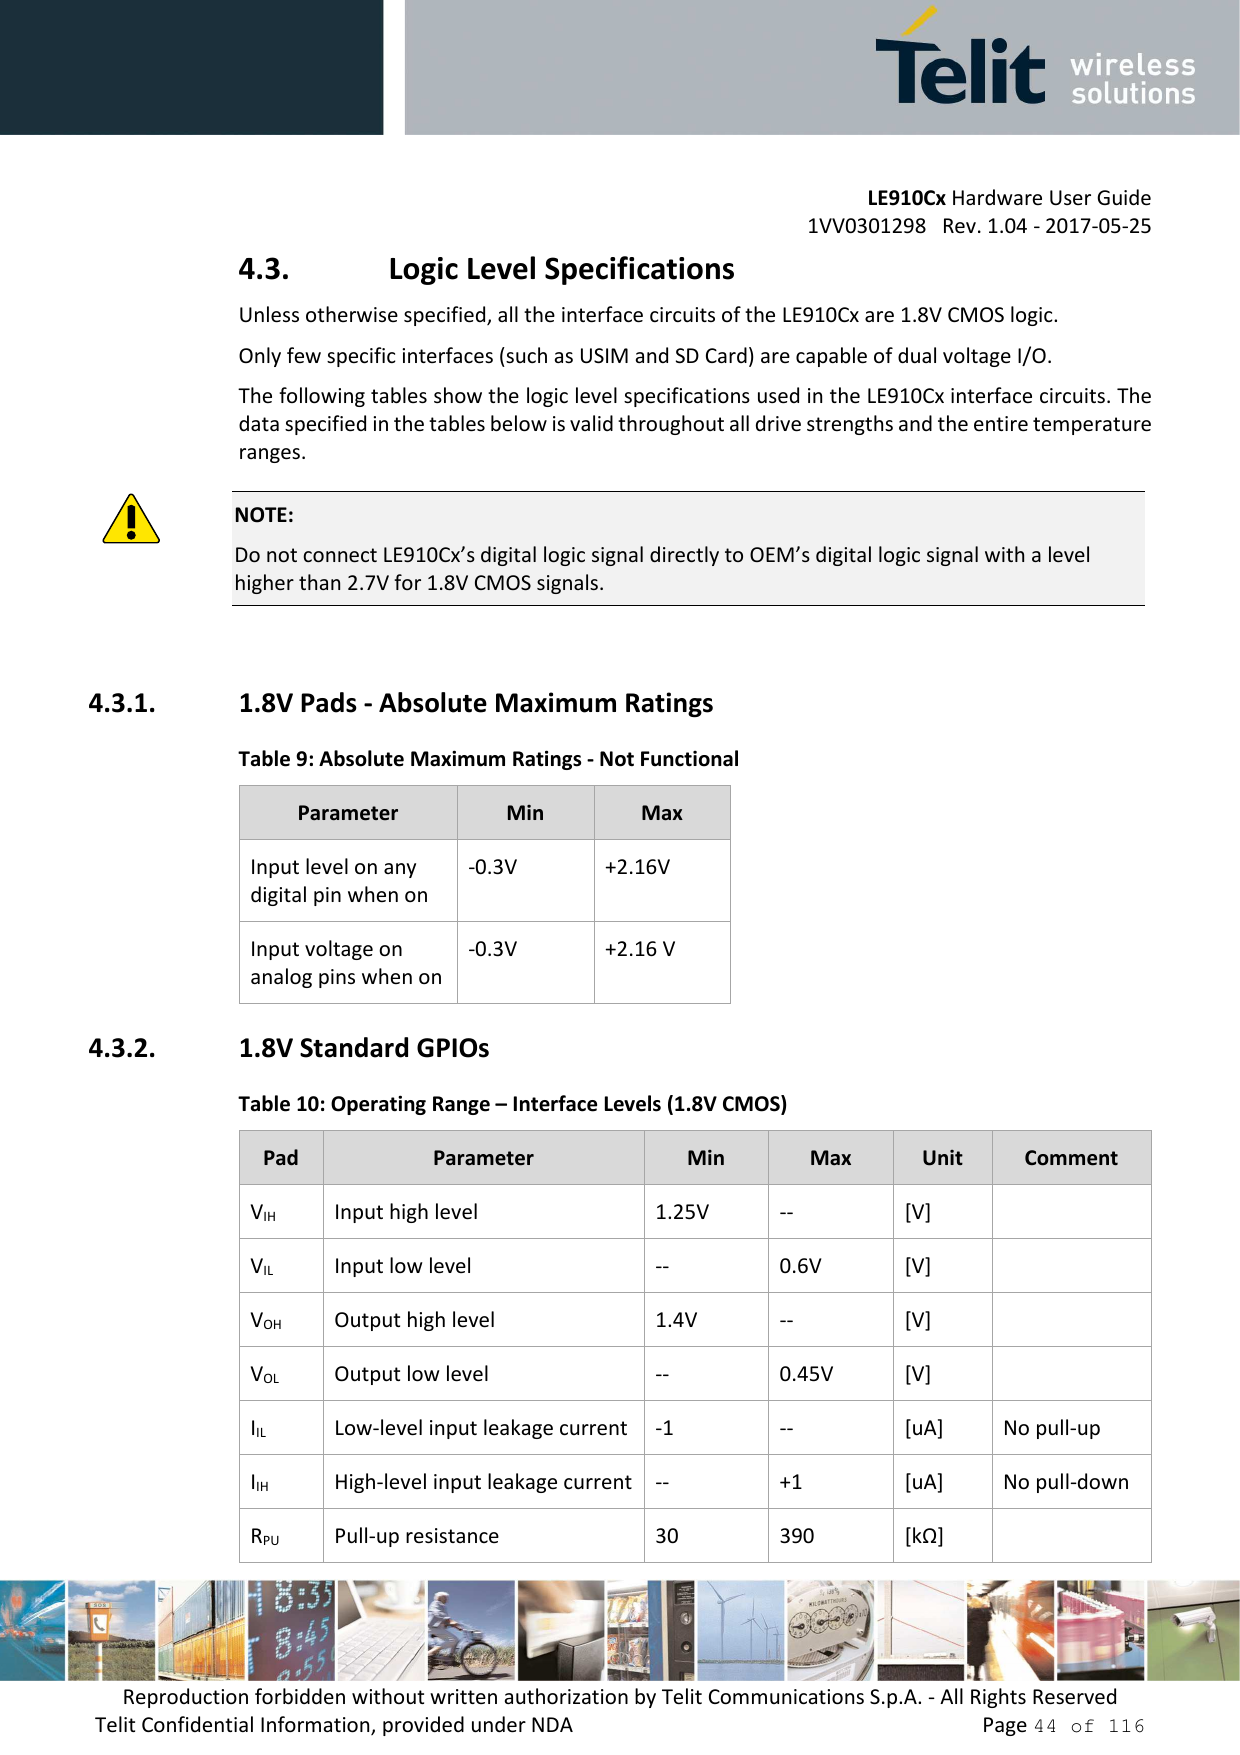         LE910Cx Hardware User Guide 1VV0301298   Rev. 1.04 - 2017-05-25 Reproduction forbidden without written authorization by Telit Communications S.p.A. - All Rights Reserved Telit Confidential Information, provided under NDA                 Page 44 of 116 4.3. Logic Level Specifications Unless otherwise specified, all the interface circuits of the LE910Cx are 1.8V CMOS logic. Only few specific interfaces (such as USIM and SD Card) are capable of dual voltage I/O. The following tables show the logic level specifications used in the LE910Cx interface circuits. The data specified in the tables below is valid throughout all drive strengths and the entire temperature ranges.  NOTE: Do not connect LE910Cx’s digital logic signal directly to OEM’s digital logic signal with a level higher than 2.7V for 1.8V CMOS signals.  4.3.1. 1.8V Pads - Absolute Maximum Ratings Table 9: Absolute Maximum Ratings - Not Functional Parameter  Min  Max Input level on any digital pin when on -0.3V  +2.16V Input voltage on analog pins when on -0.3V  +2.16 V 4.3.2. 1.8V Standard GPIOs Table 10: Operating Range – Interface Levels (1.8V CMOS) Pad  Parameter  Min  Max  Unit  Comment VIH  Input high level  1.25V  --  [V]   VIL  Input low level  --  0.6V  [V]   VOH  Output high level  1.4V  --  [V]   VOL  Output low level  --  0.45V  [V]   IIL  Low-level input leakage current  -1  --  [uA]  No pull-up IIH  High-level input leakage current  --  +1  [uA]  No pull-down RPU  Pull-up resistance  30  390  [kΩ]   